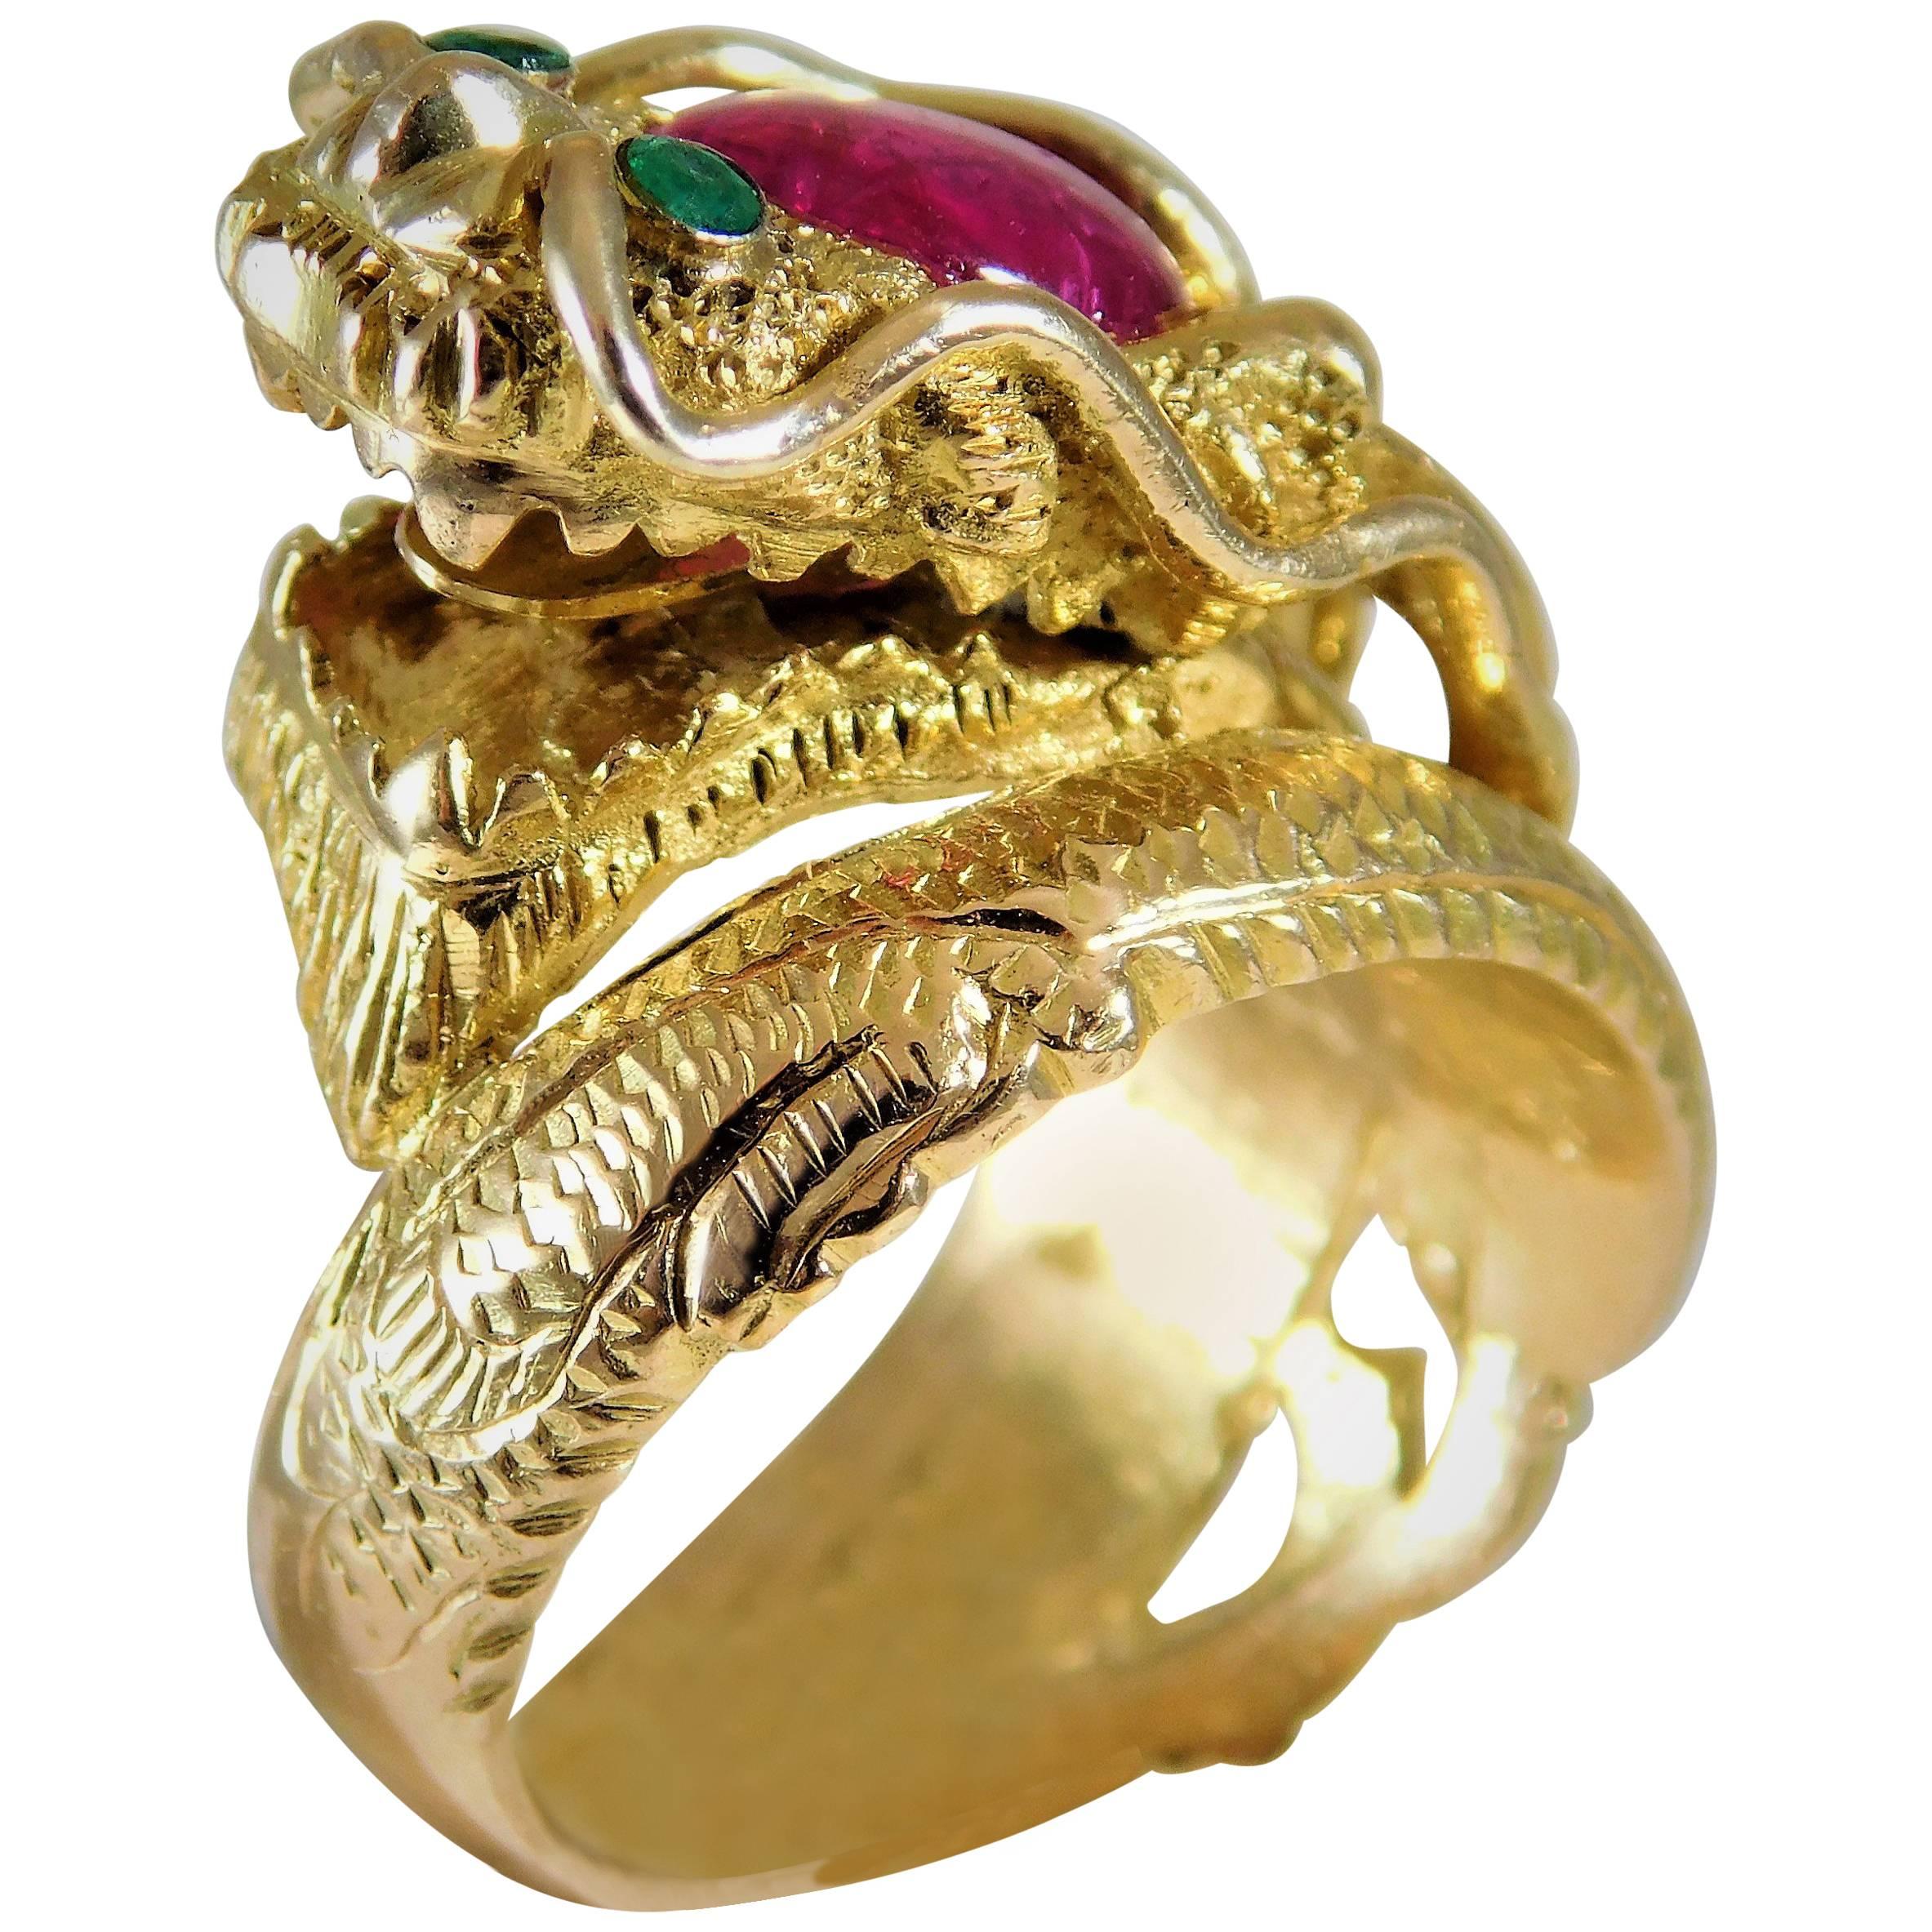 Handcrafted 14 Karat Gold Ruby and Emerald Serpentine Dragon Ring